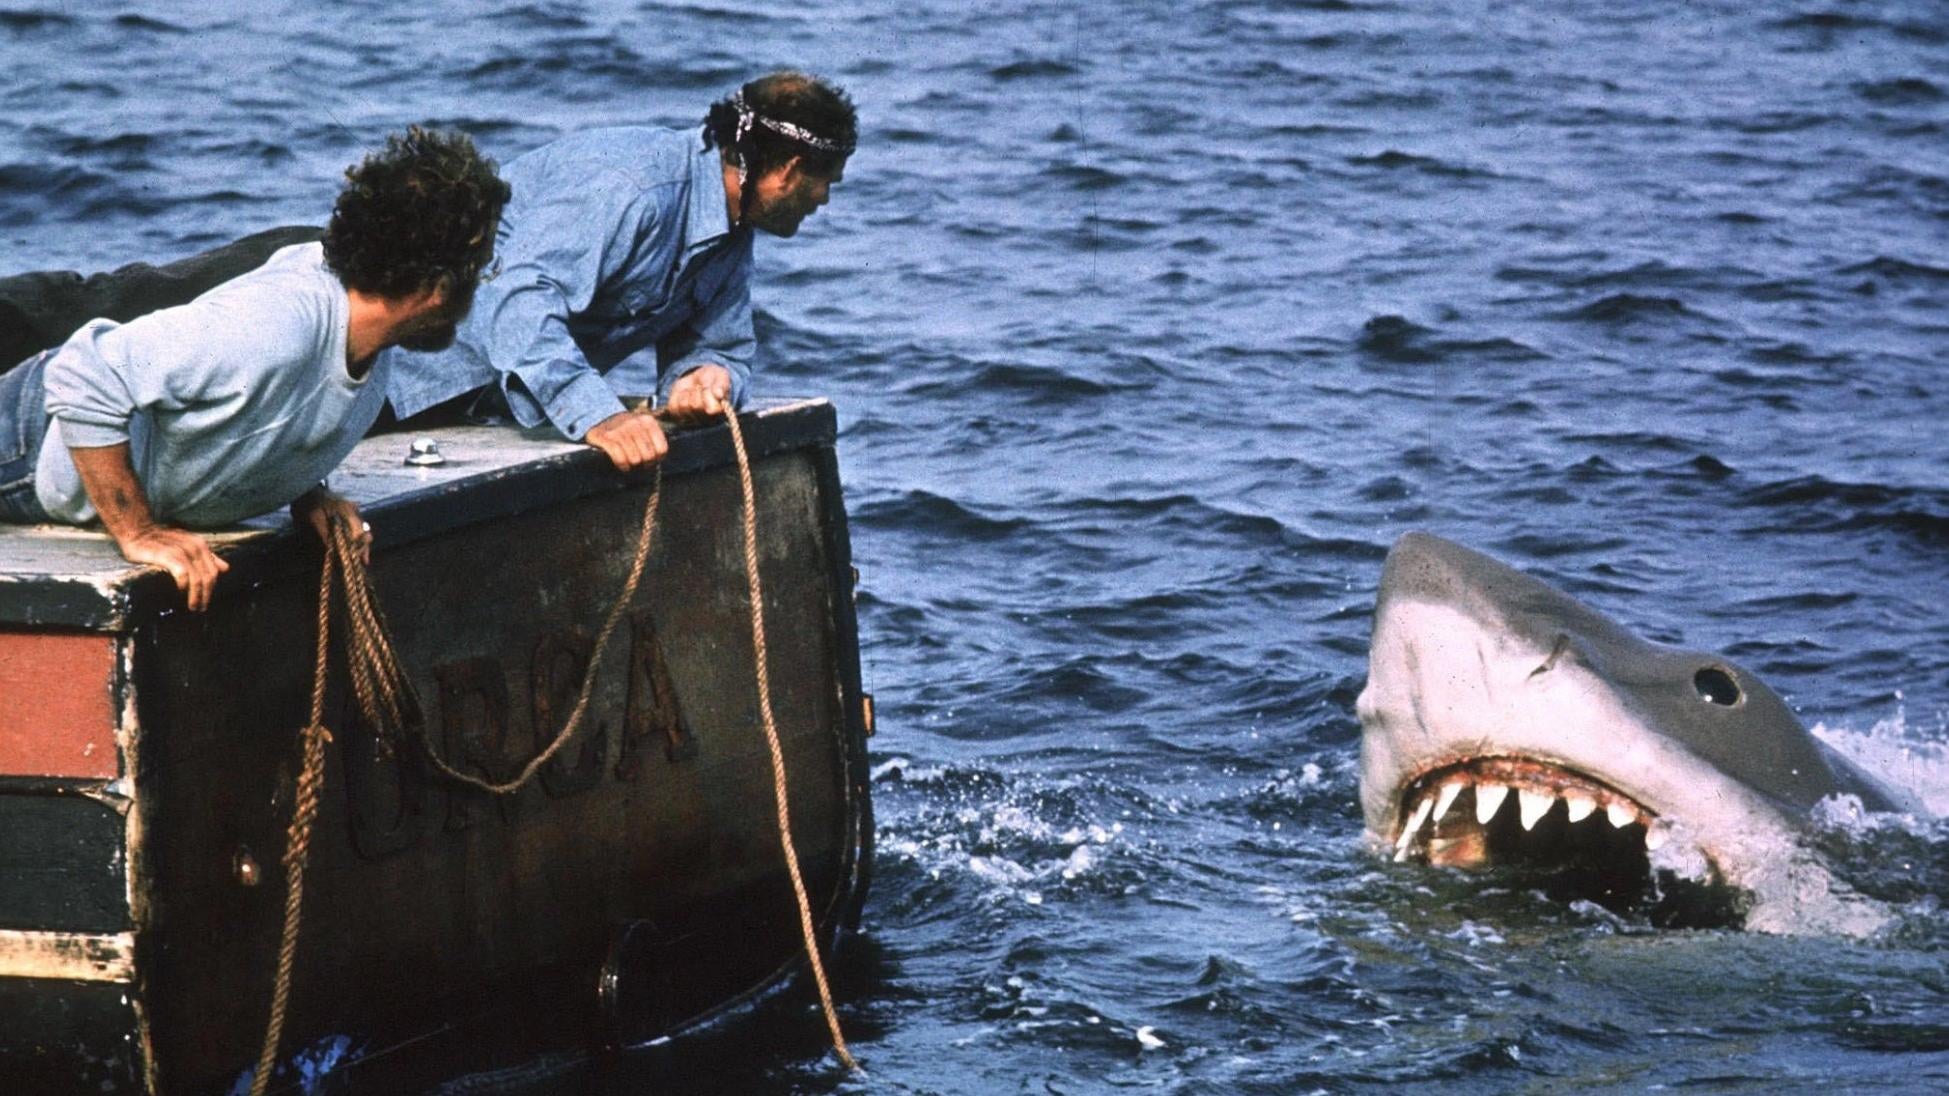 Jaws coming for Hooper and Quint. (Image: Universal)